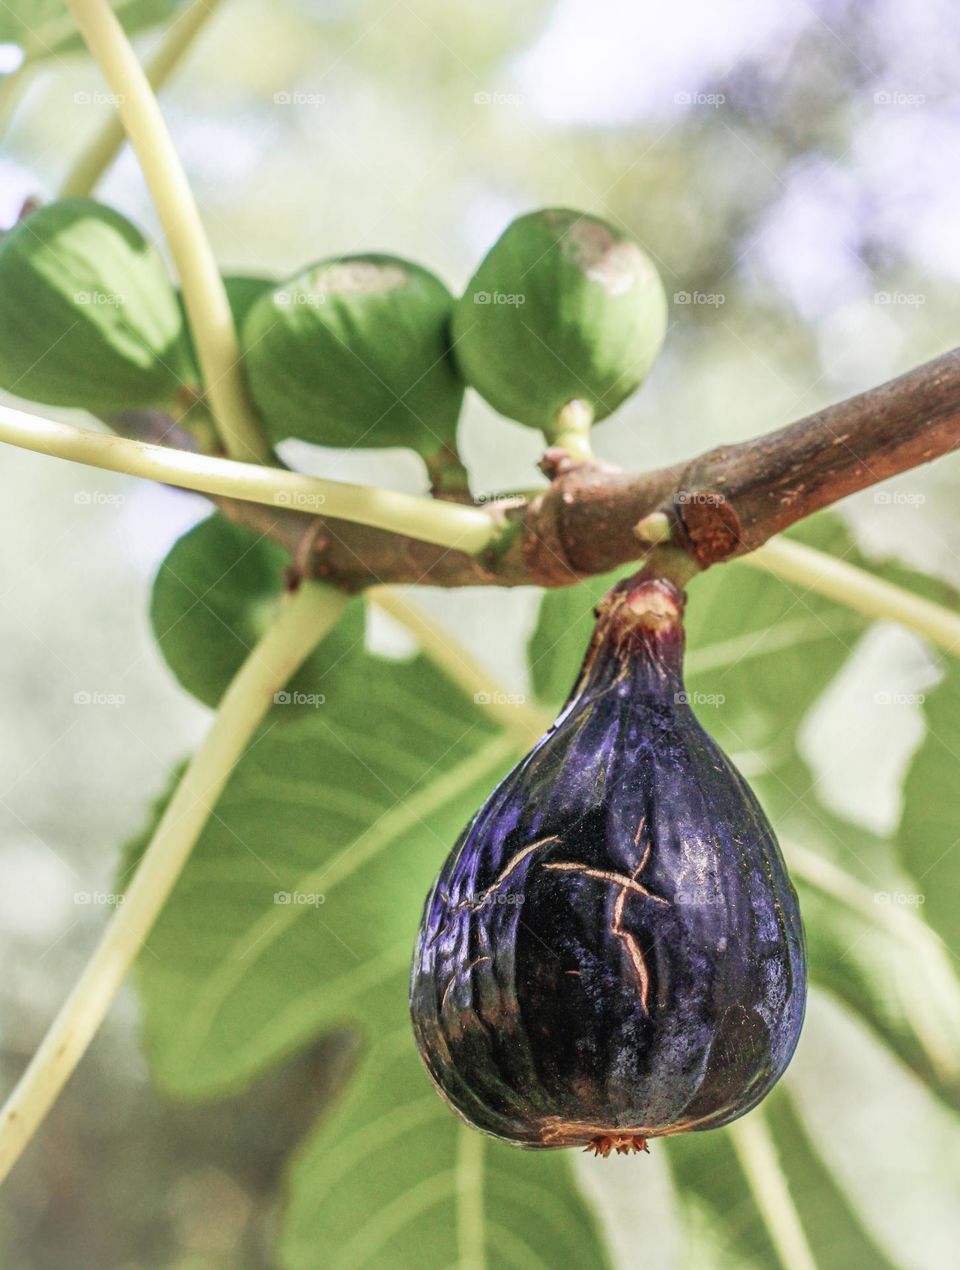 One ripe purple fig hanging from the tree, in contrast to the smaller green ones behind it.